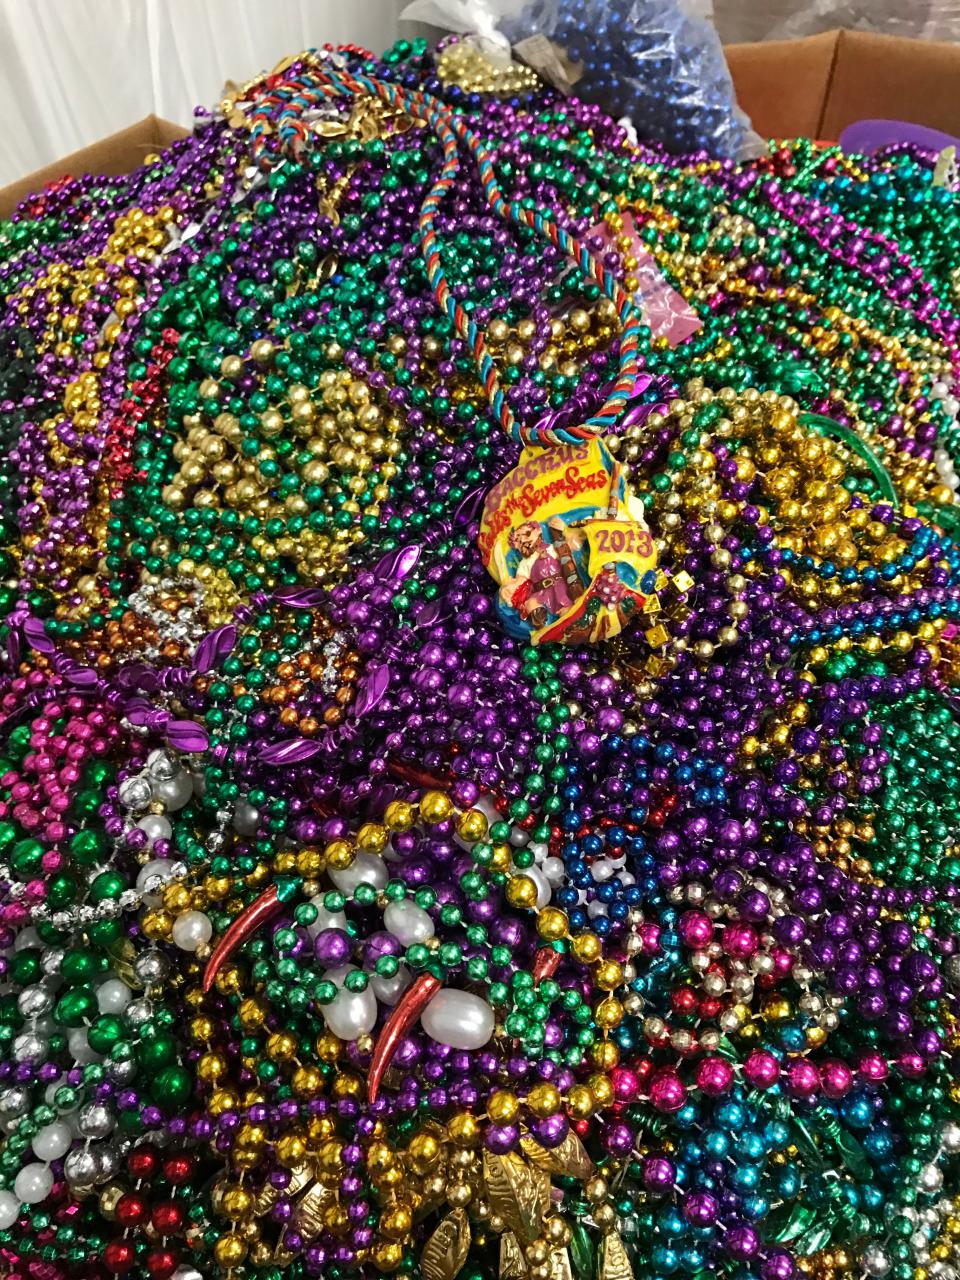 Recycling Mardi Gras beads saves plastic and money.